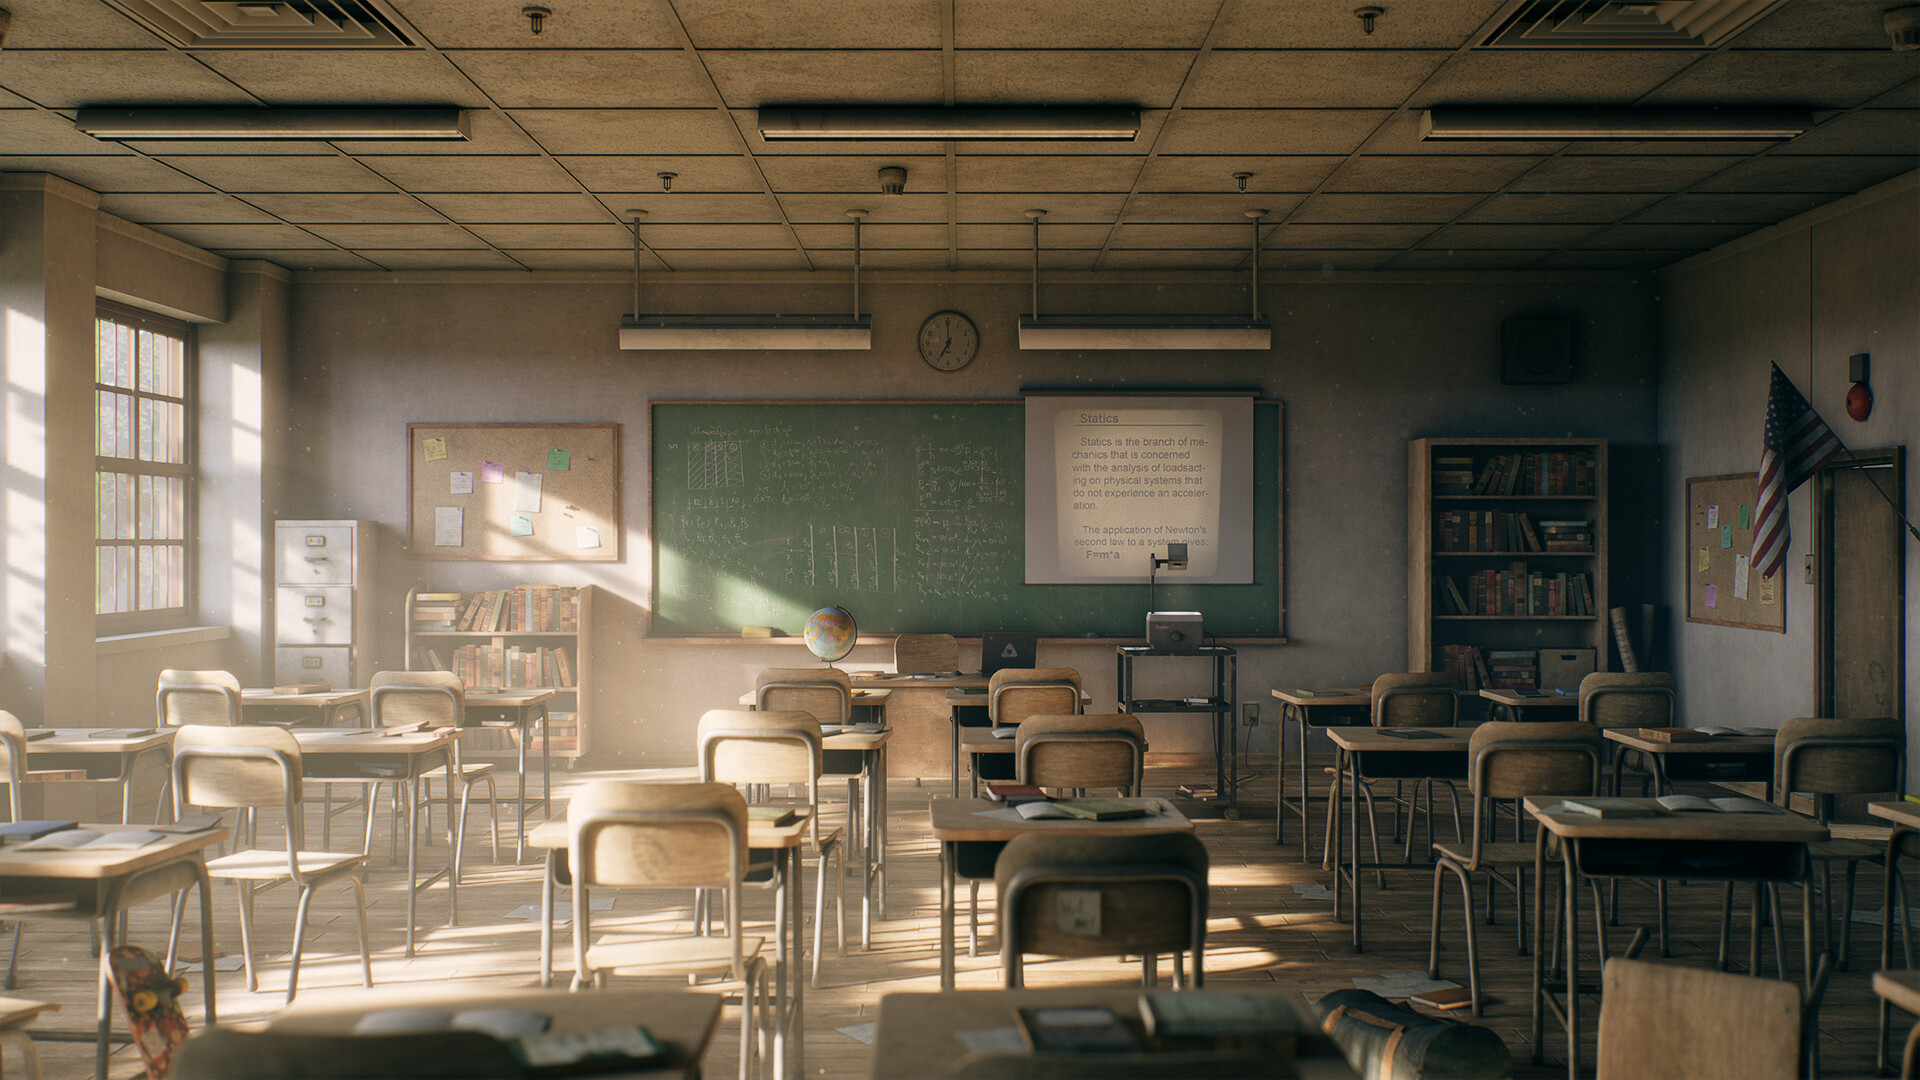 Anime Classroom Asset Pack in Environments - UE Marketplace